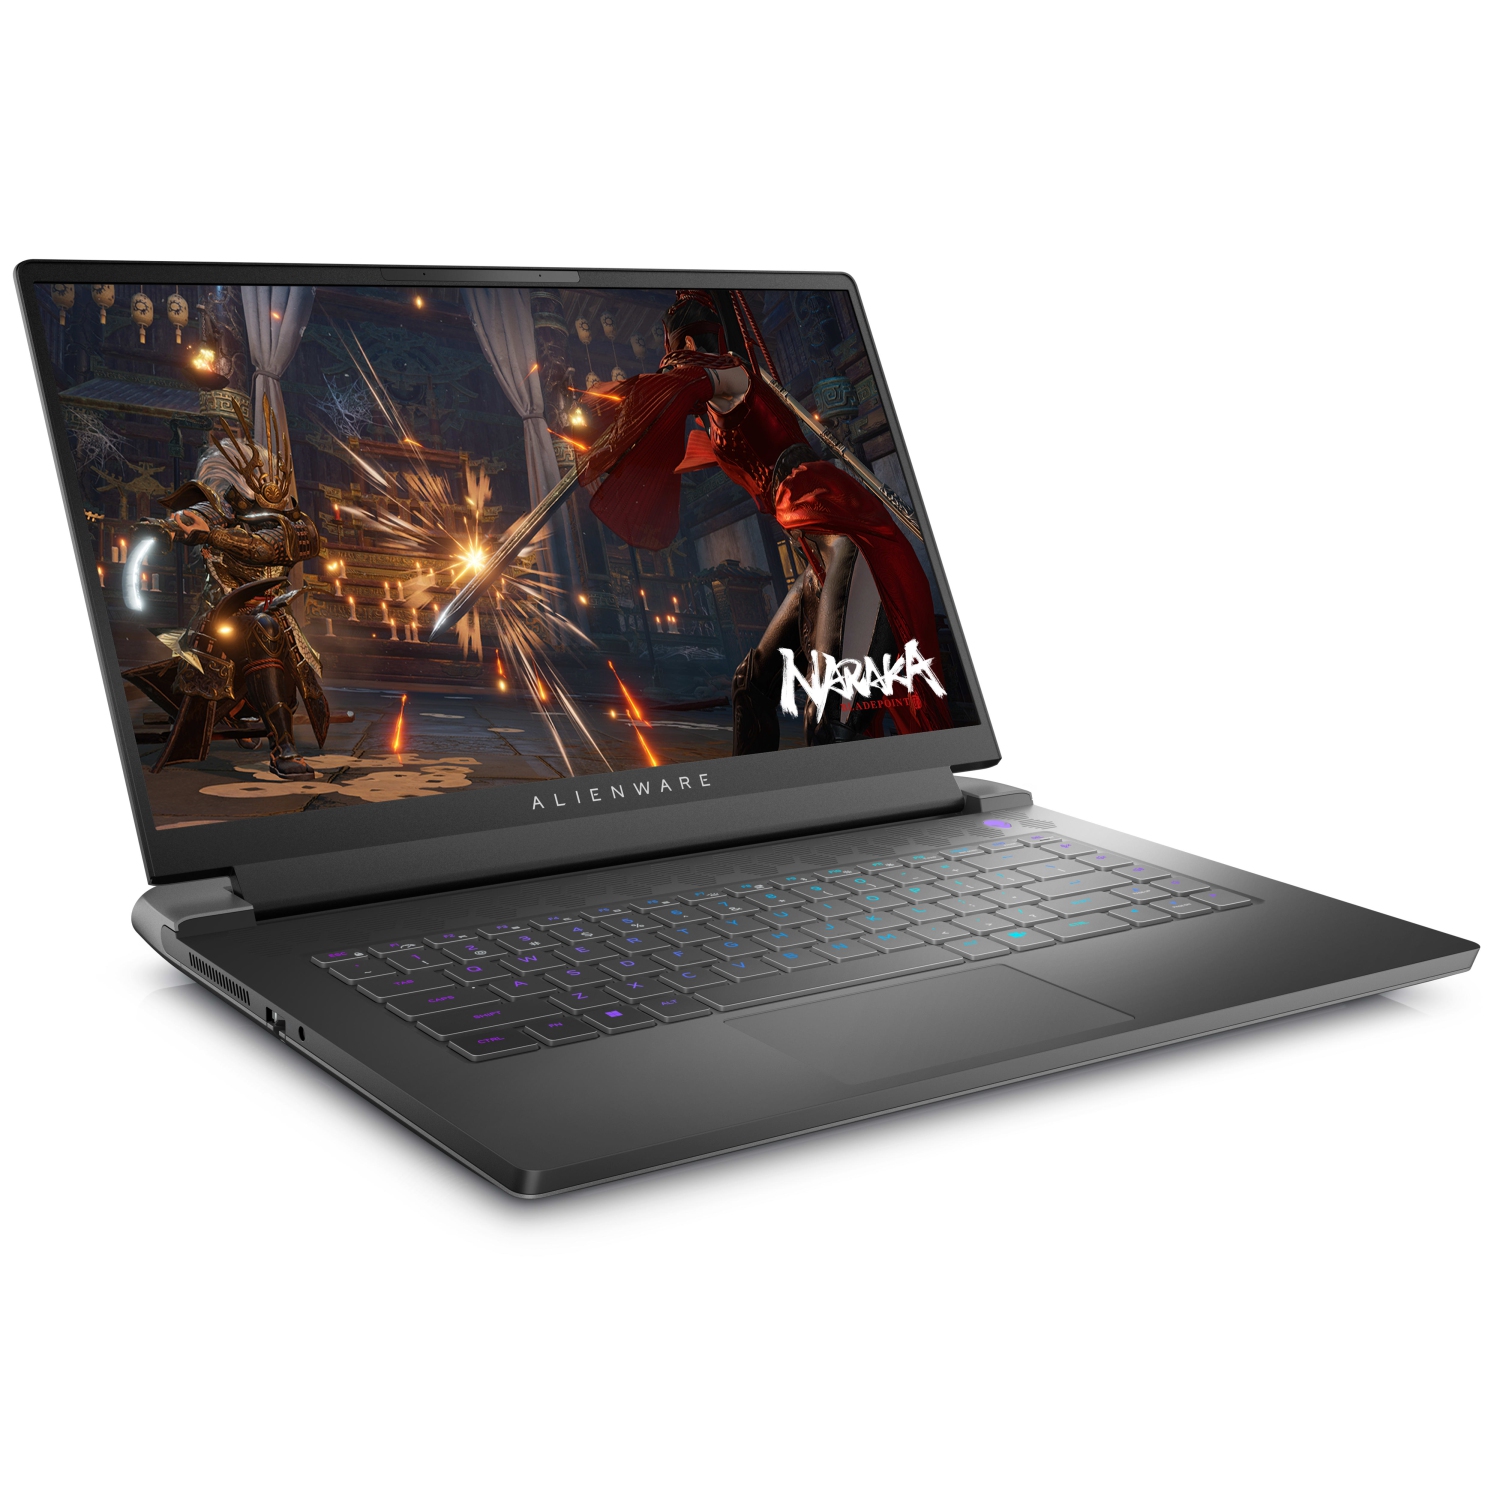 Refurbished (Excellent) – Dell Alienware m15 R7 Gaming Laptop (2022) | 15.6" FHD | Core i9 - 4TB SSD - 64GB RAM - RTX 3080 | 14 Cores @ 5 GHz - 12th Gen CPU - 8GB GDDR6X